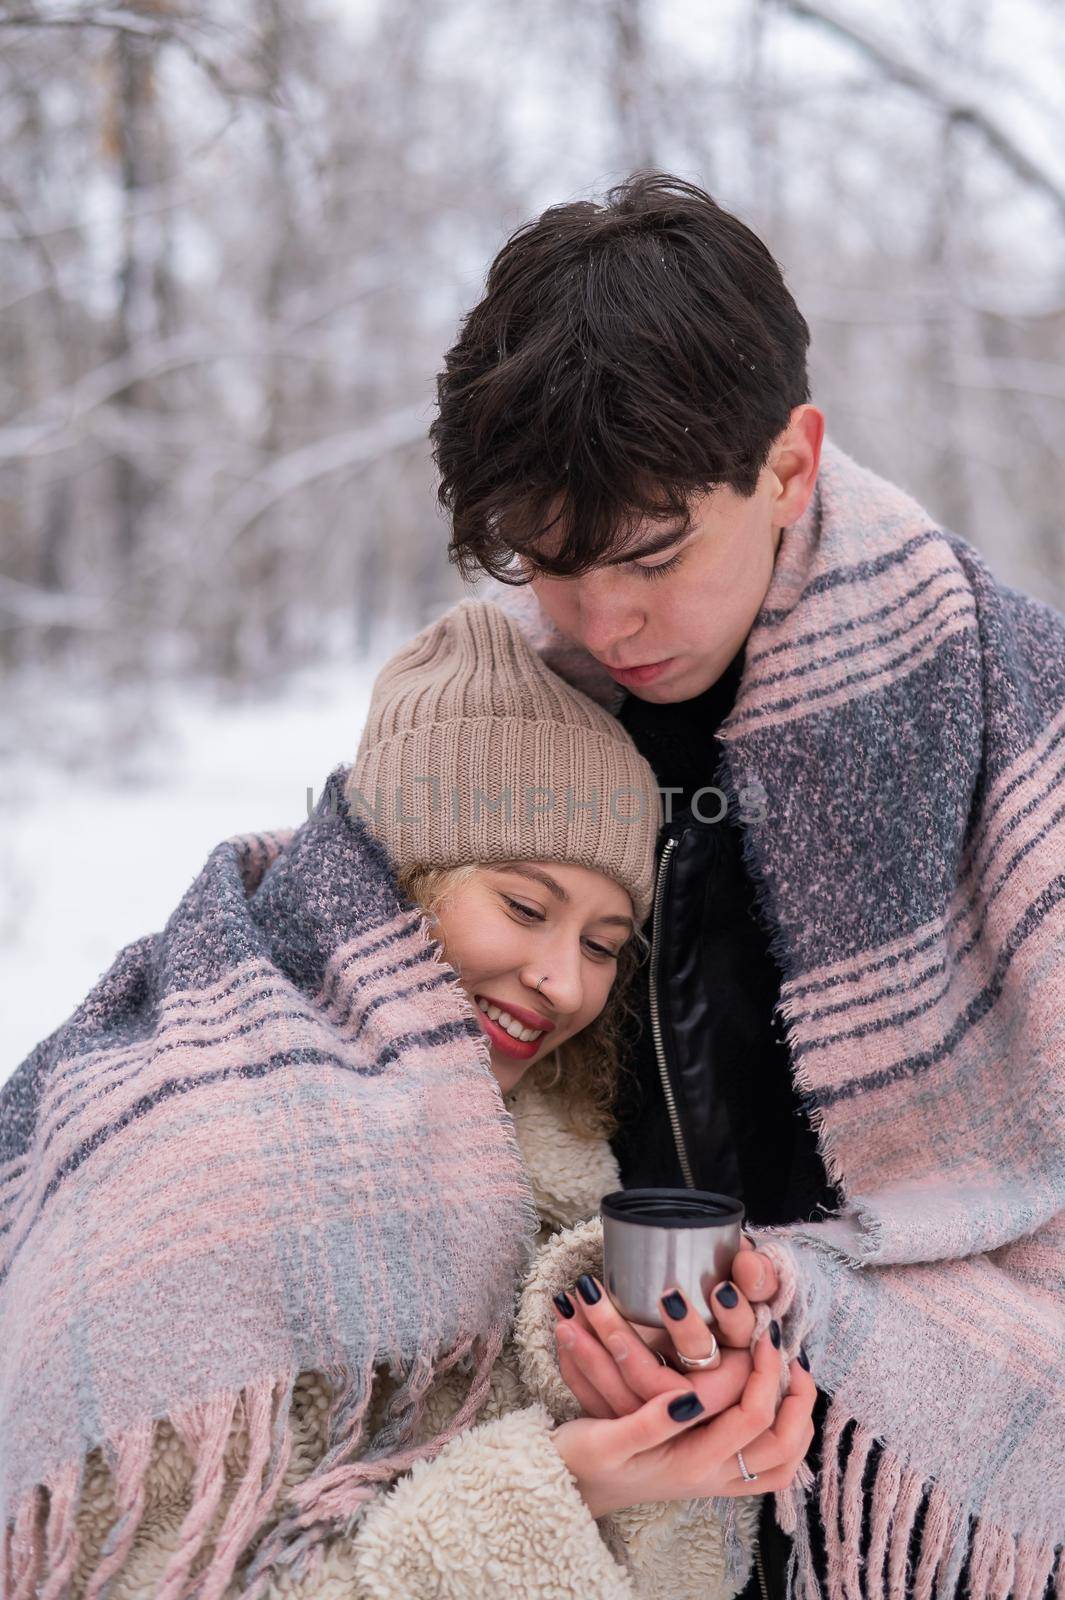 A young couple walks in the park in winter. The guy and the girl are drinking a warming drink outdoors